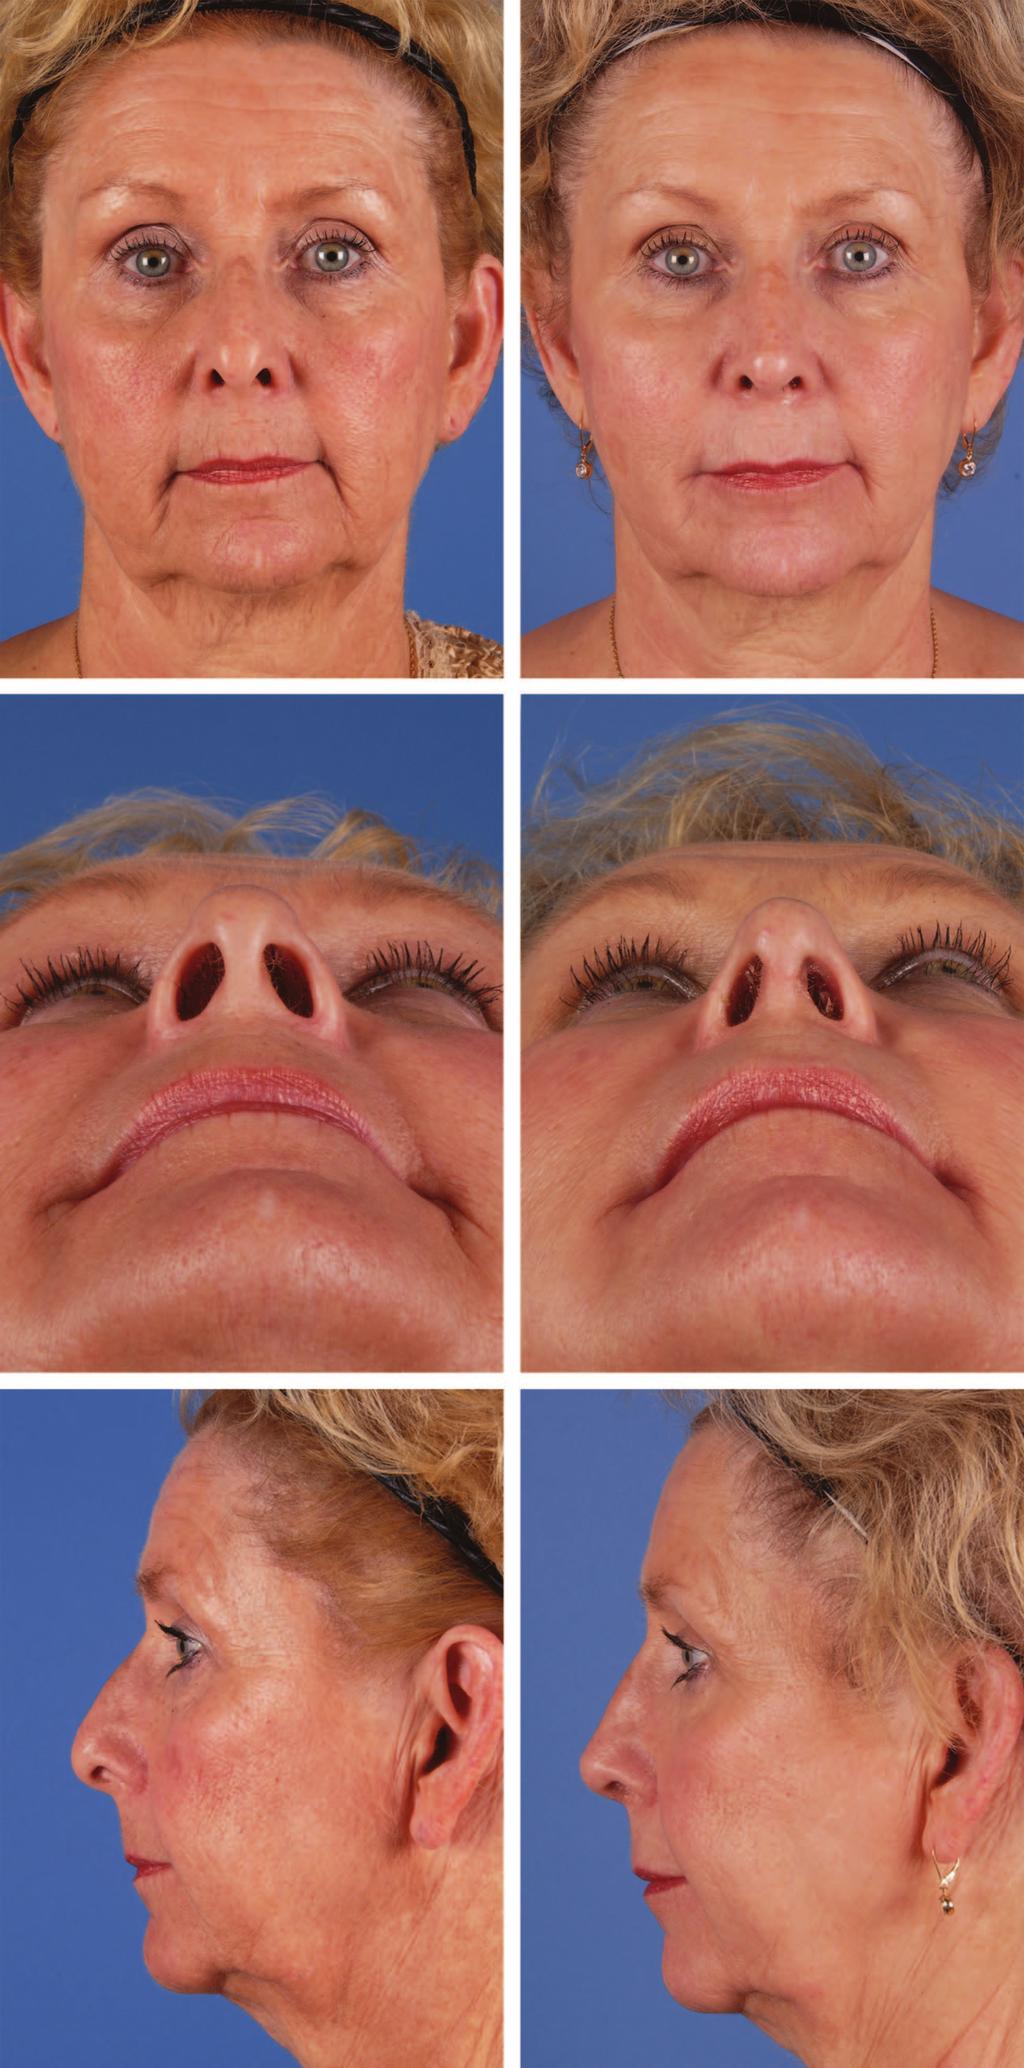 Plastic and Reconstructive Surgery October 2012 Fig. 2. Case1: agingnose.